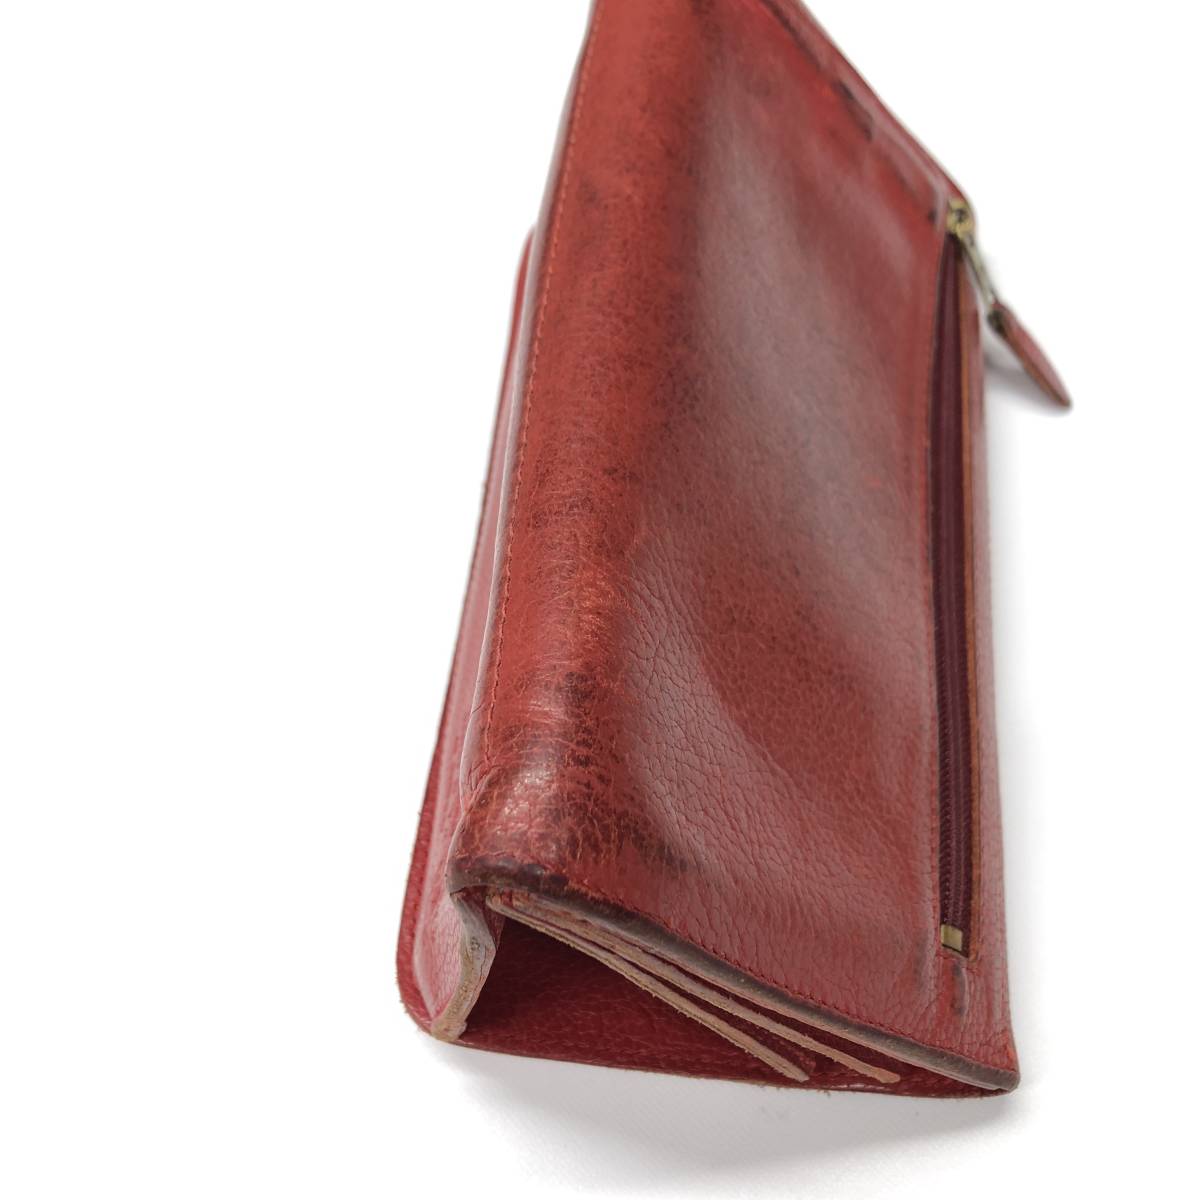  Il Bisonte IL BISONTE long wallet red leather 